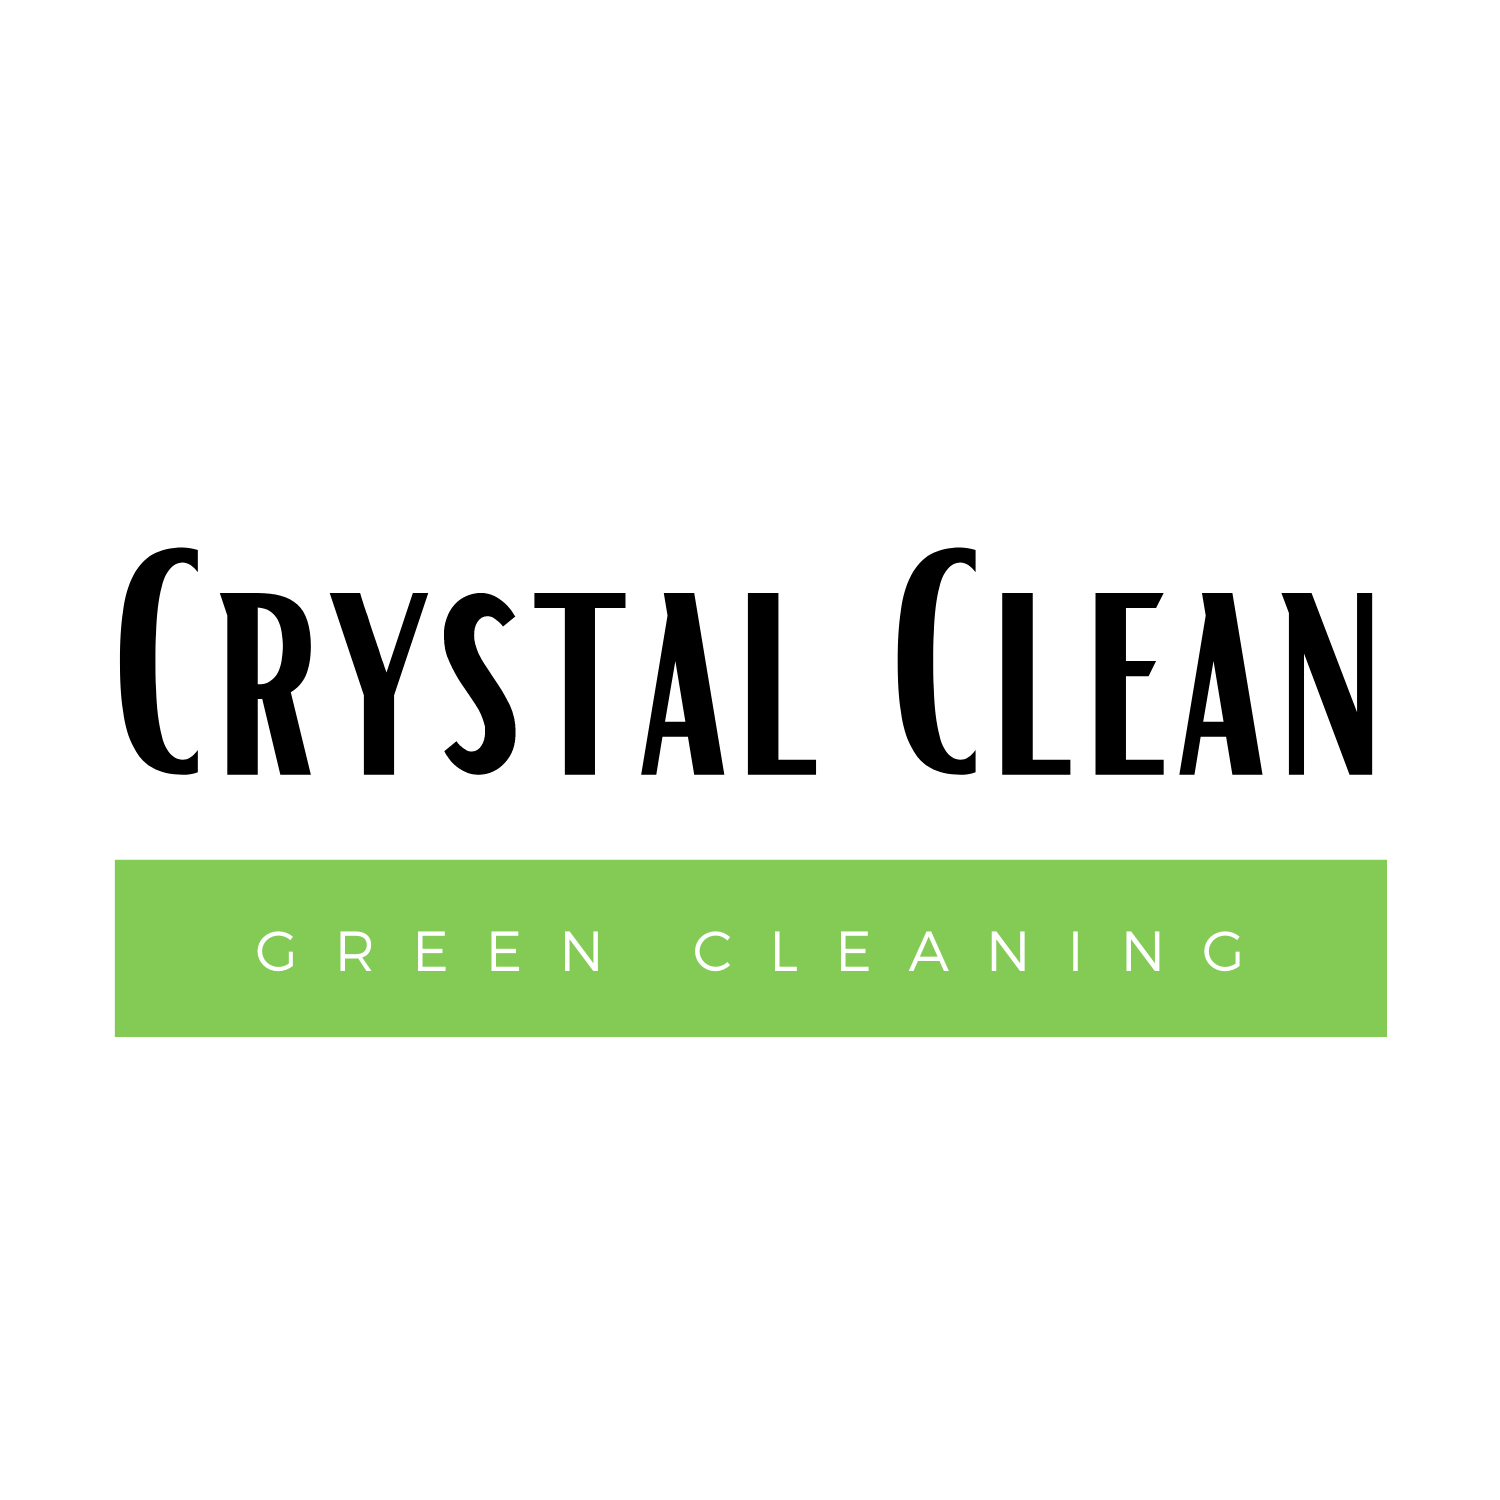 Crystal Clean Green Cleaning - Home Cleaning Service Sarasota Lakewood Ranch Bradenton